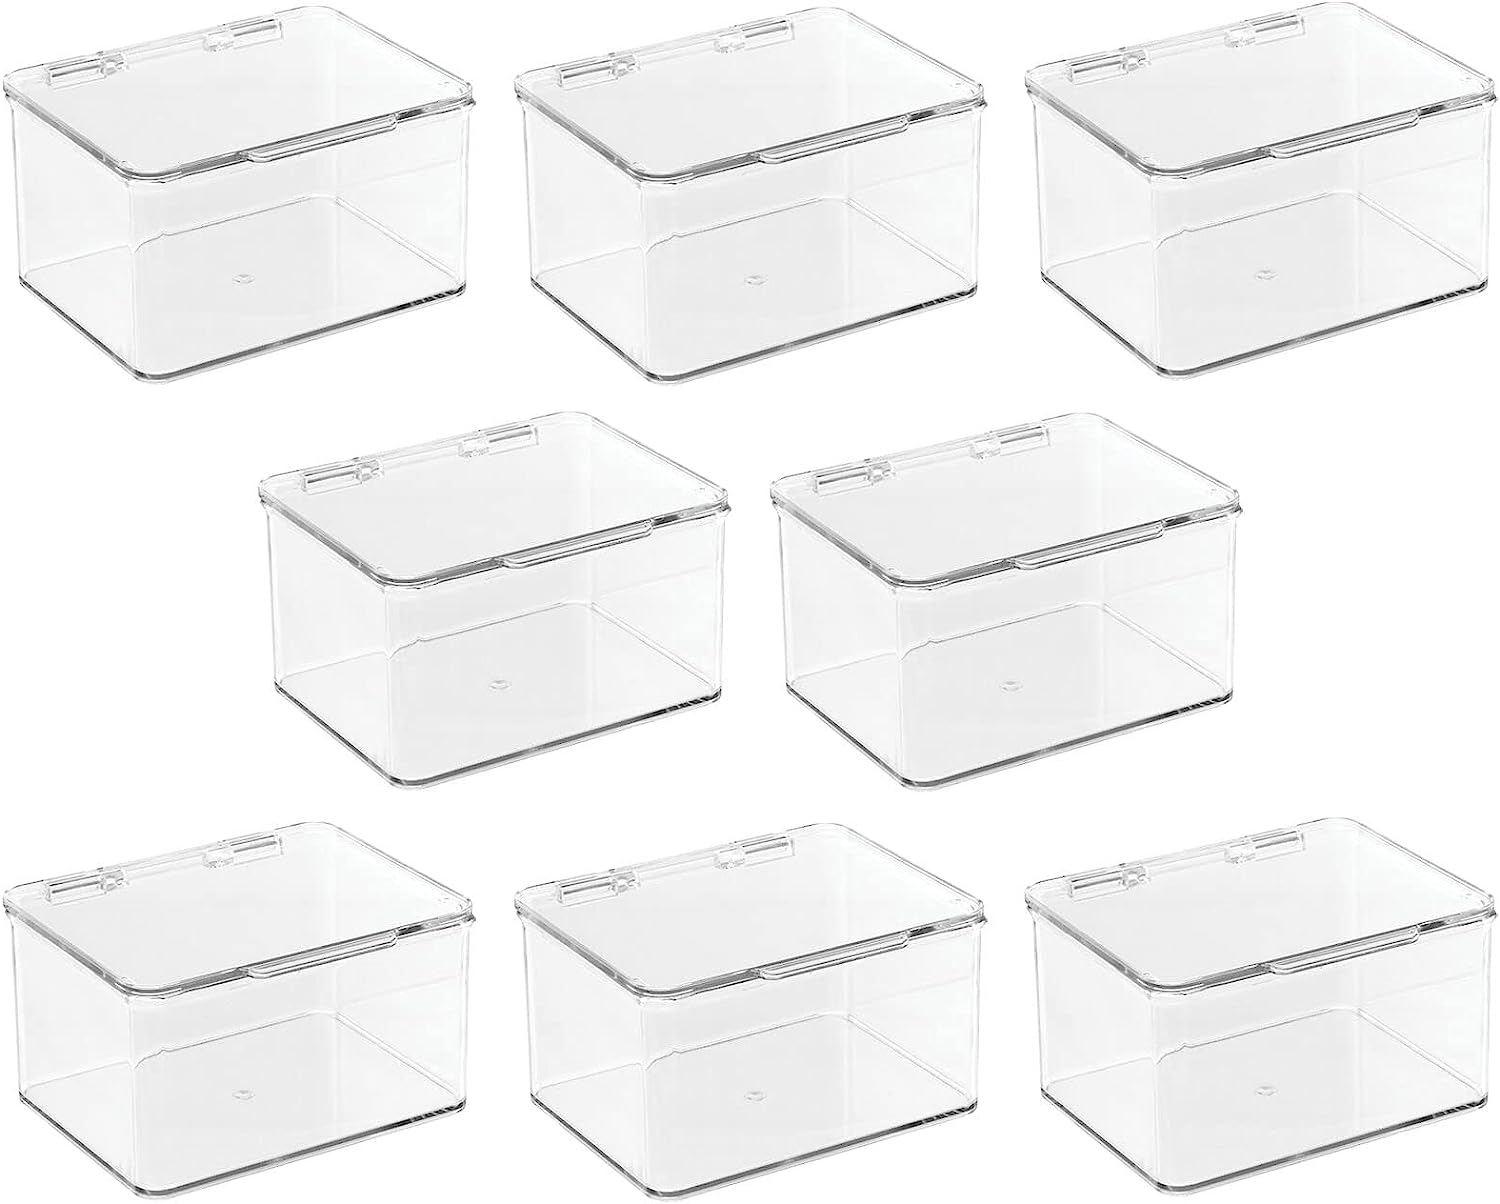 mDesign Plastic Bathroom Stacking Organizer Box with Hinged Lid, 8 Pack, Clear